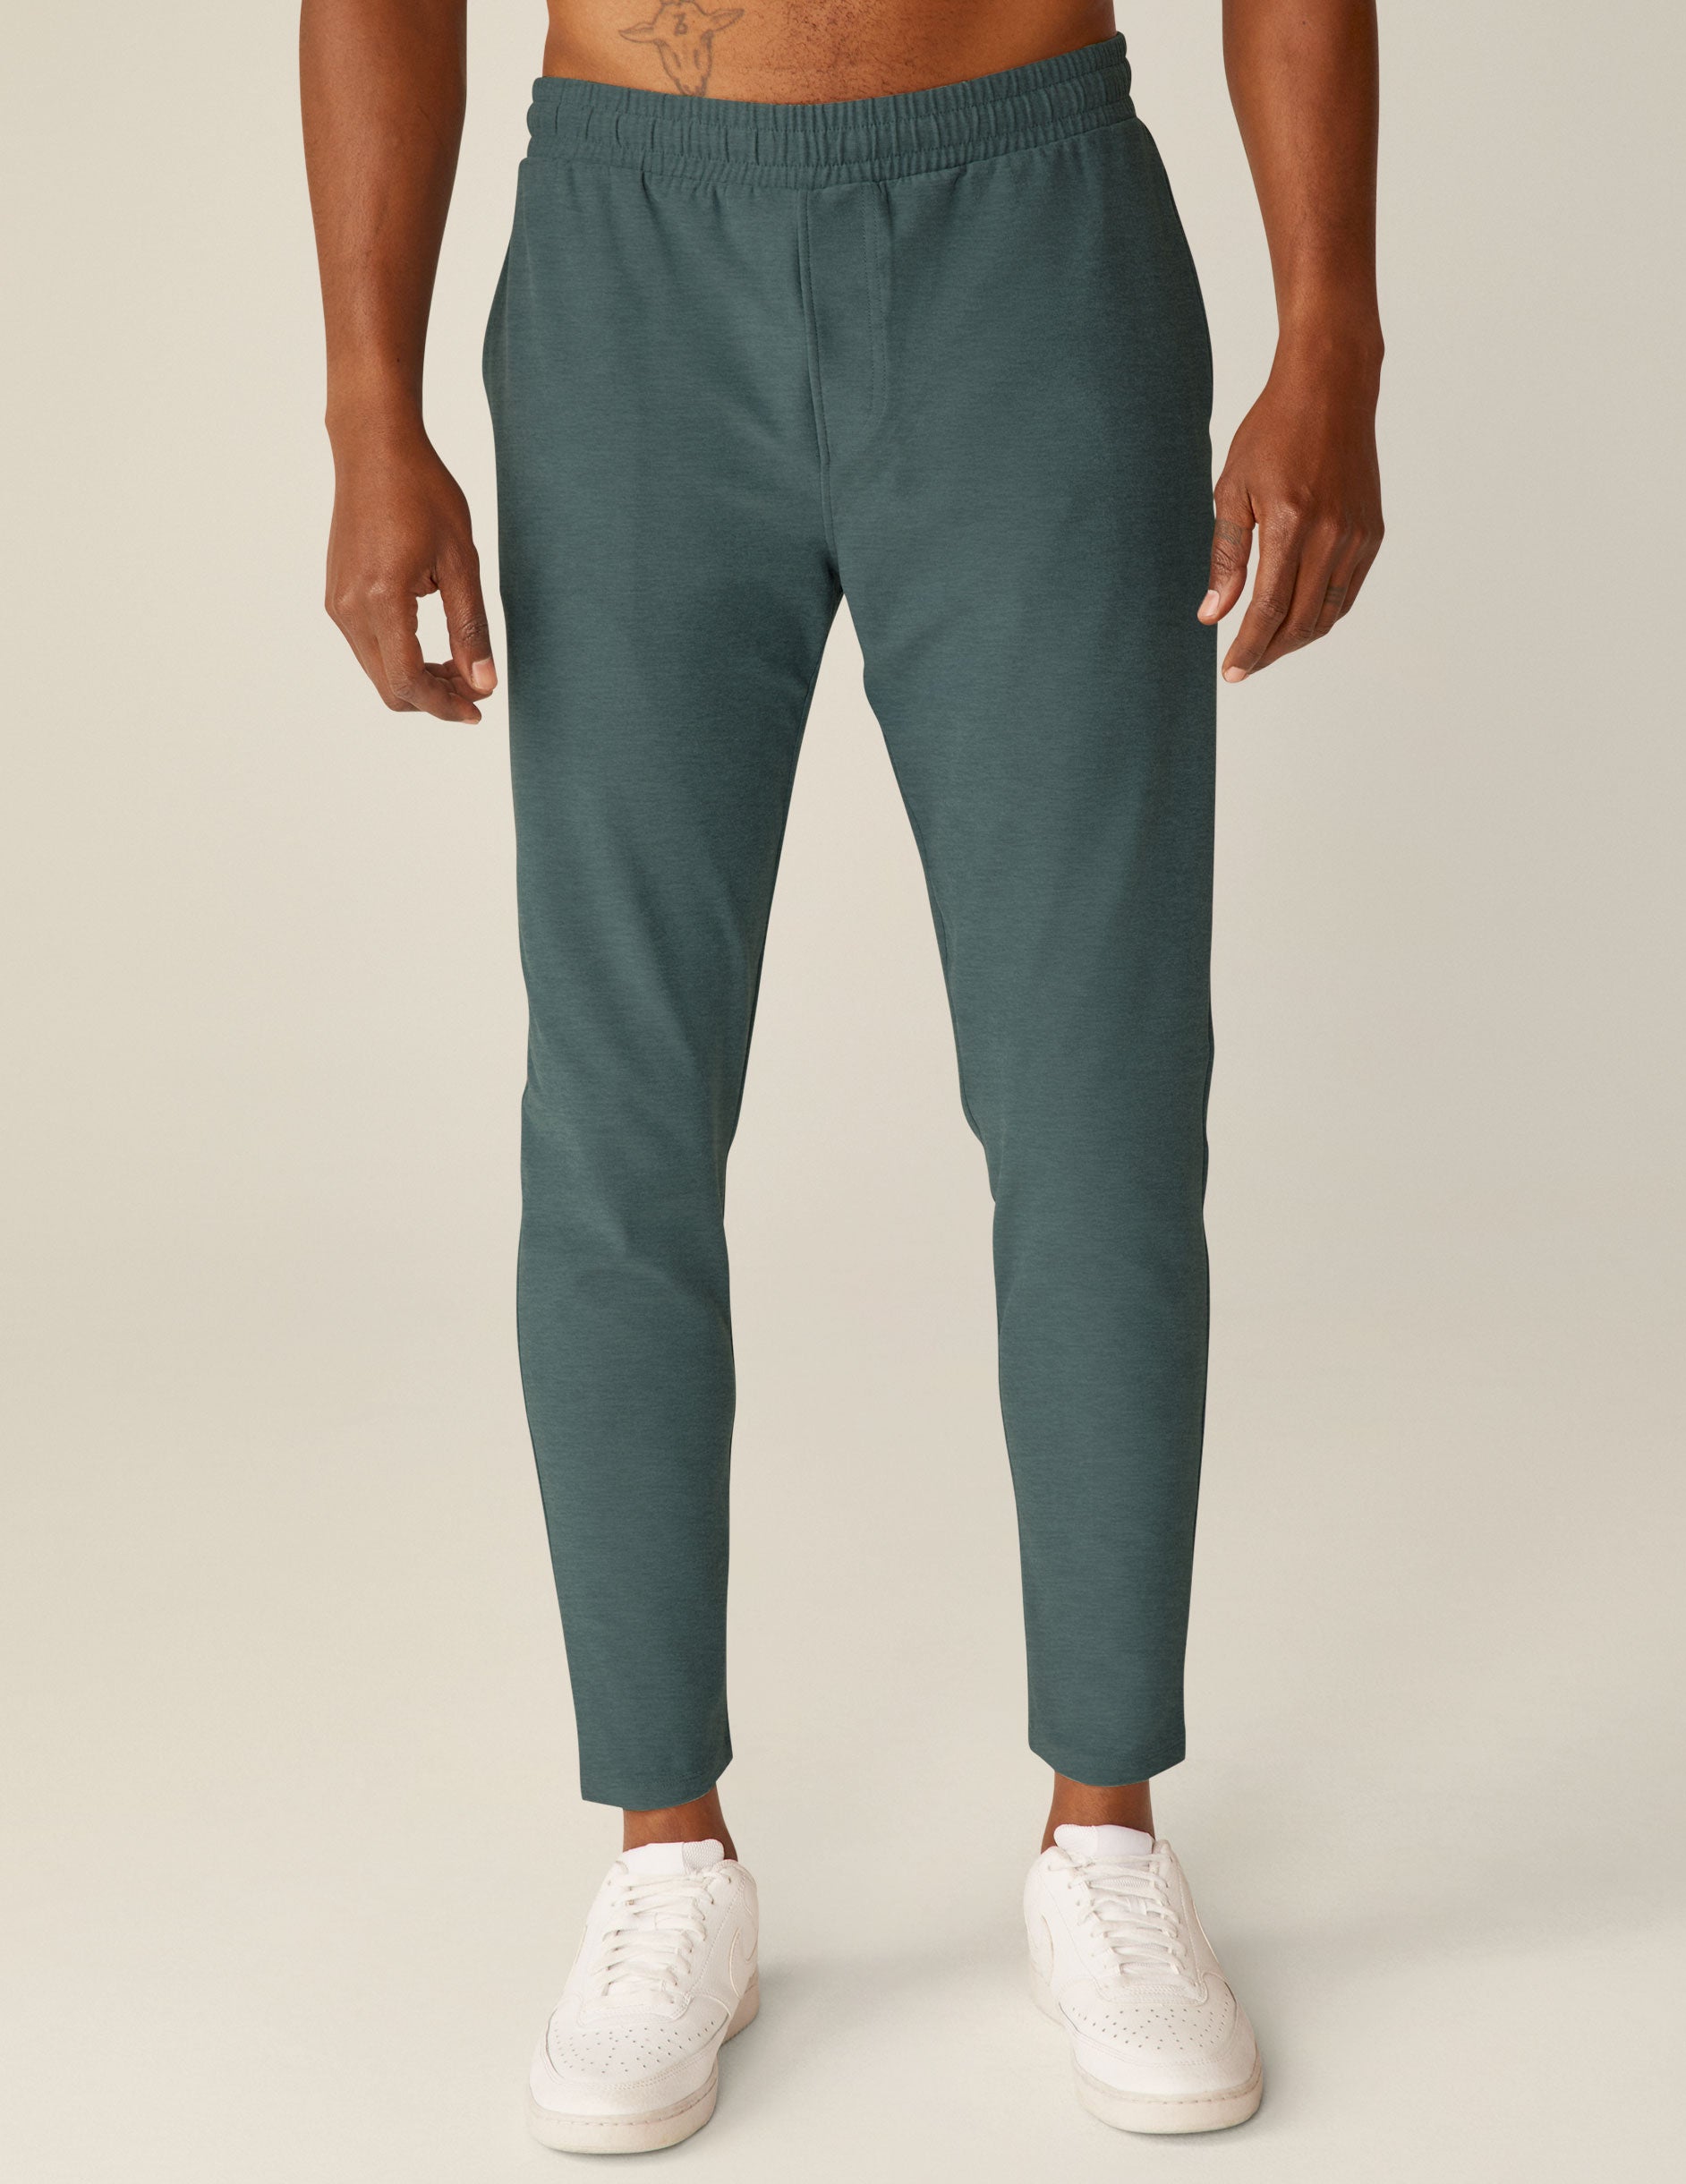 blue men's athleisure pants with pockets. 